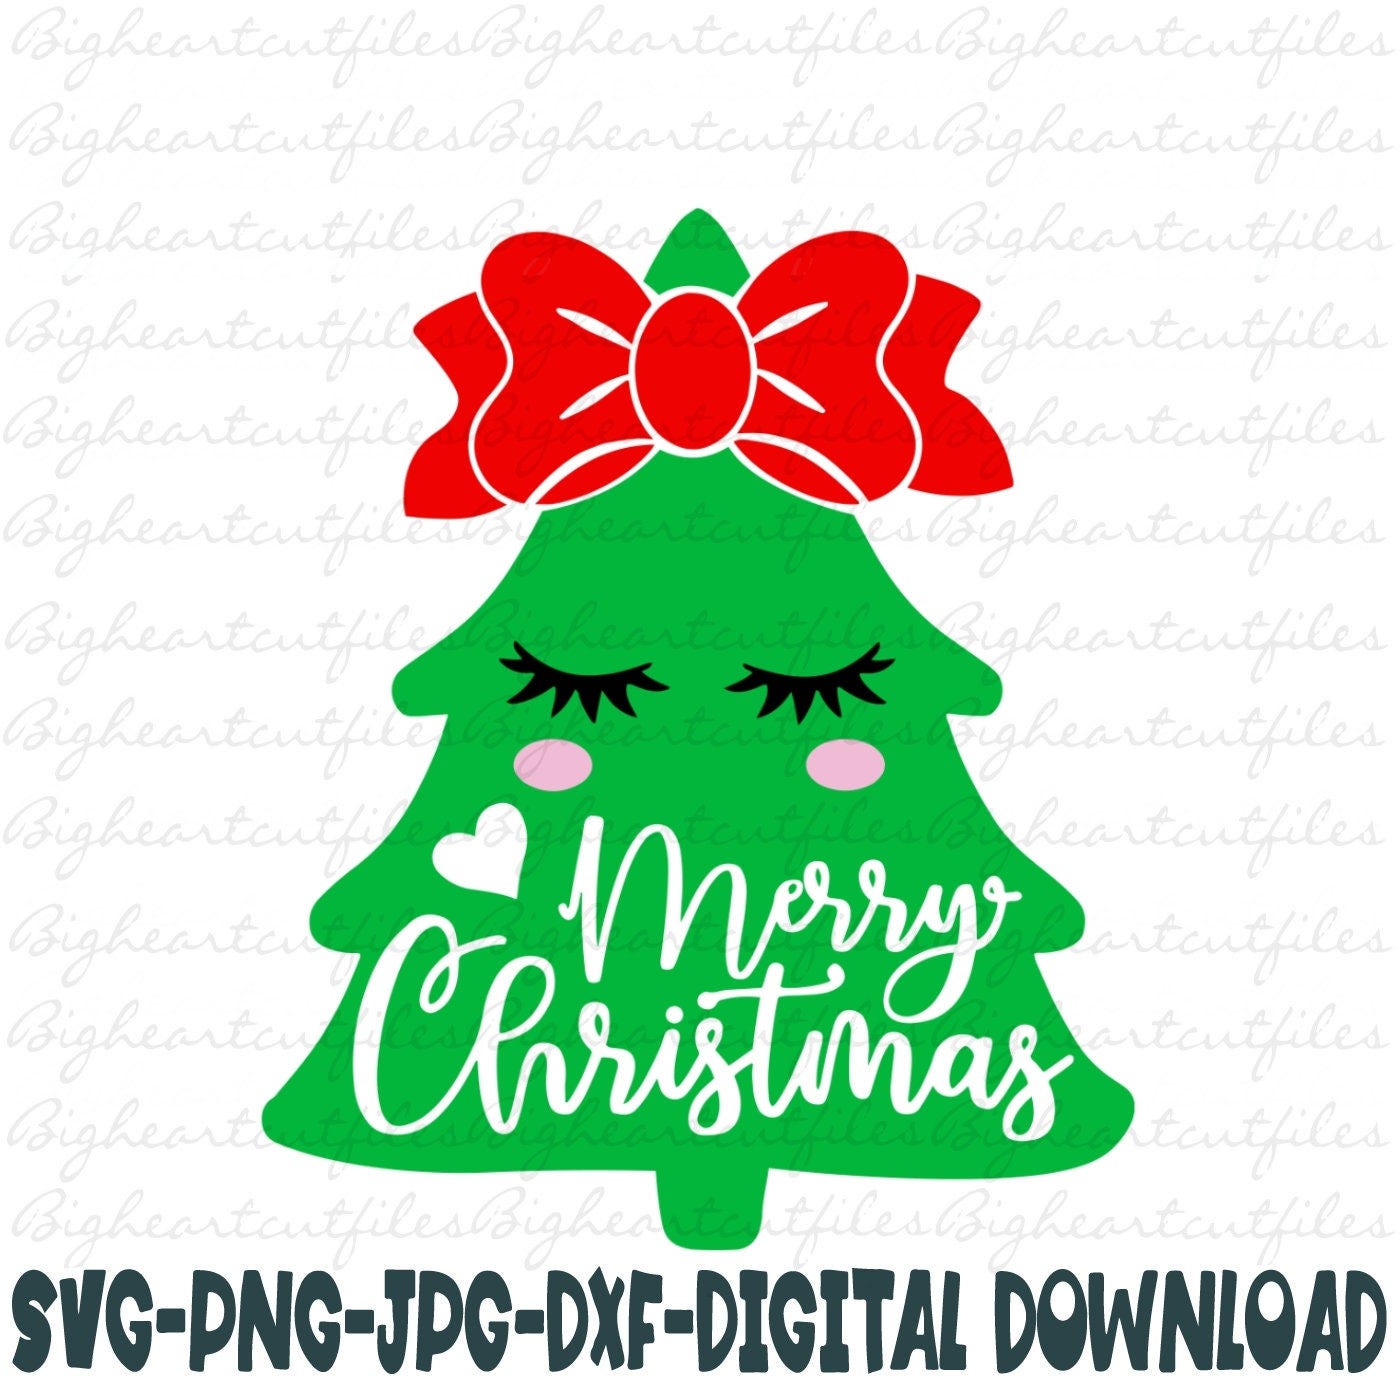 Girl Christmas Tree Svg, Png, Jpg, Dxf, Tree With Bow Svg, Merry Christmas Svg, Holiday Svg, Baby Kids Xmas, Silhouette, Cricut, Sublimation